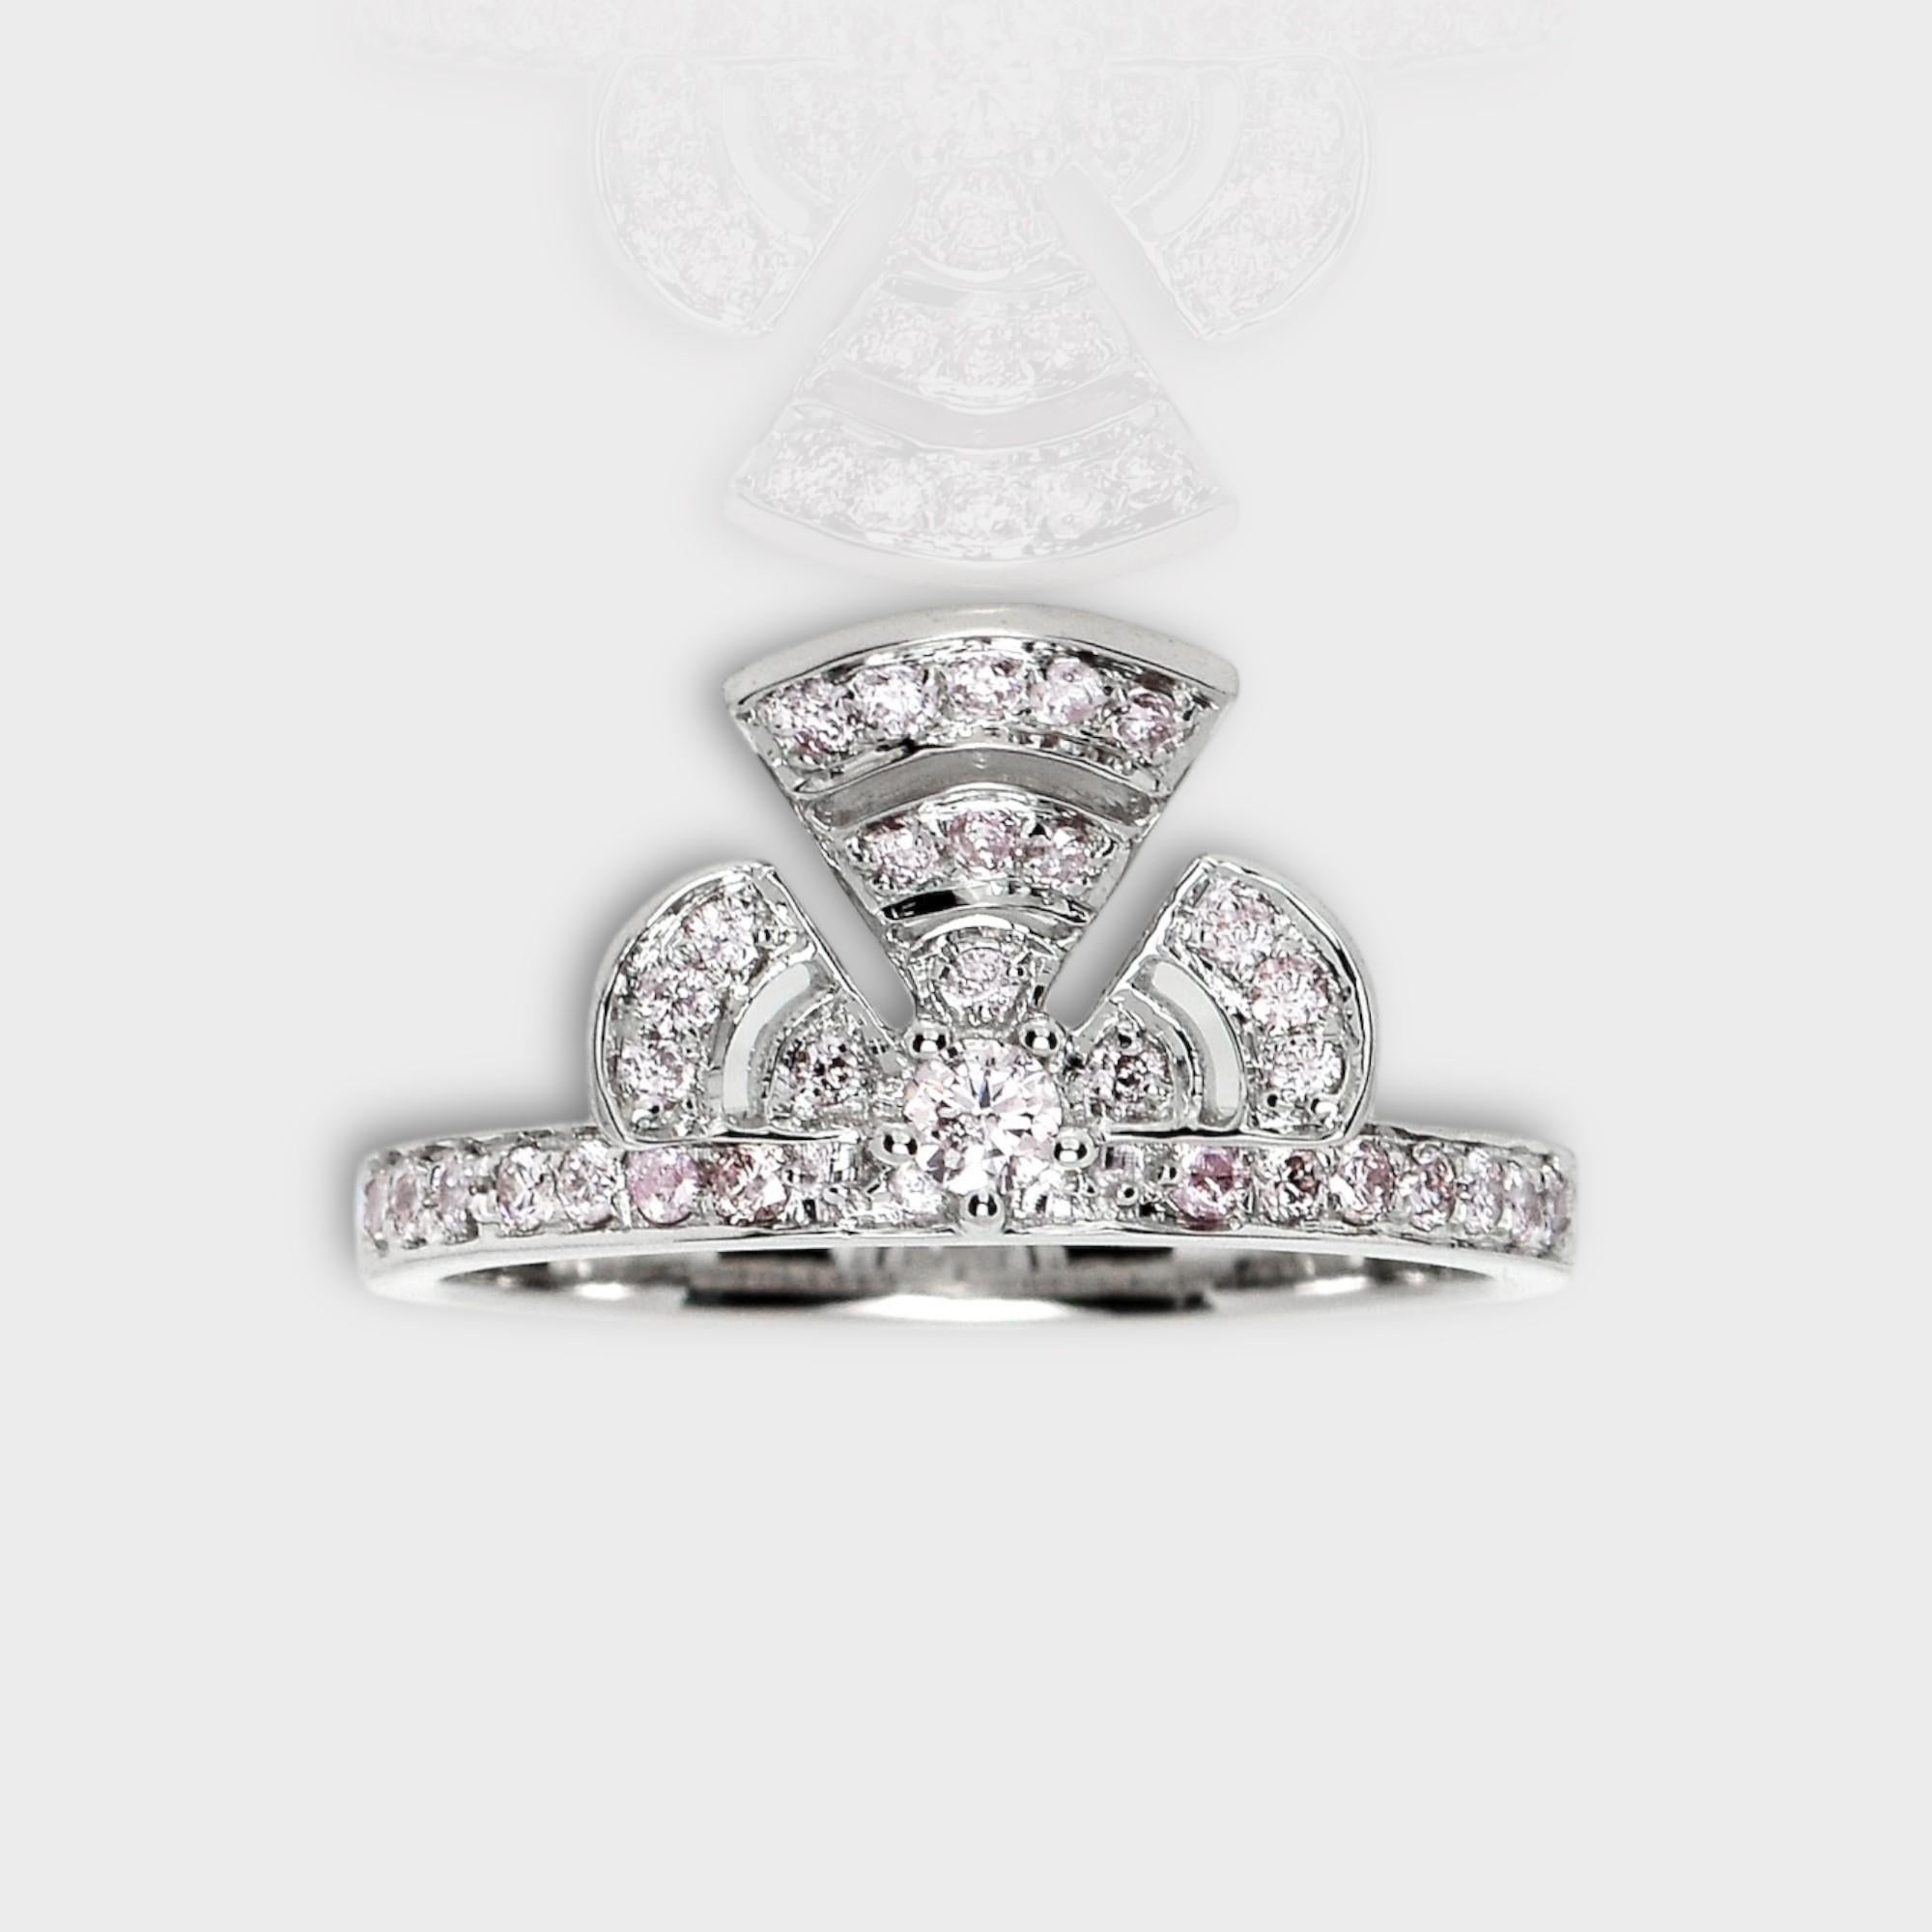 *IGI 14K 0.31 ct Natural Pink Diamonds Art Deco Design Engagement Ring*

This band features a stunning design with an art deco crafted from 14K white gold. It is set with natural pink diamonds weighing 0.31 carats.

This ring features colorful